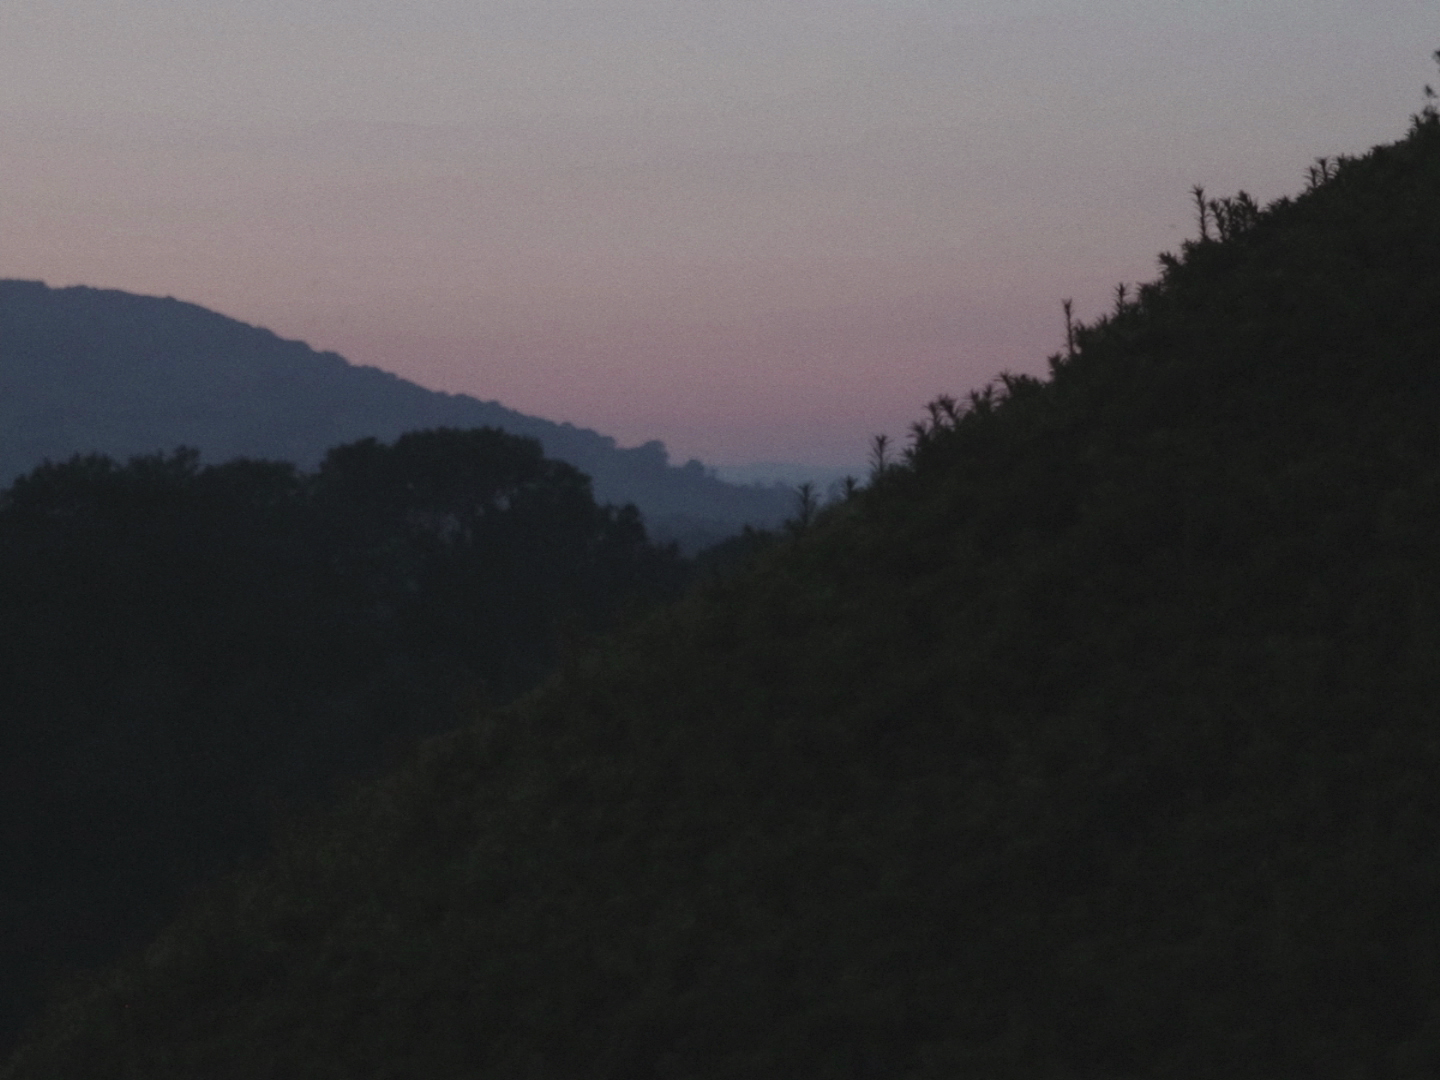 Still from the poetry film Morning. It's a landscape shot during sunset.